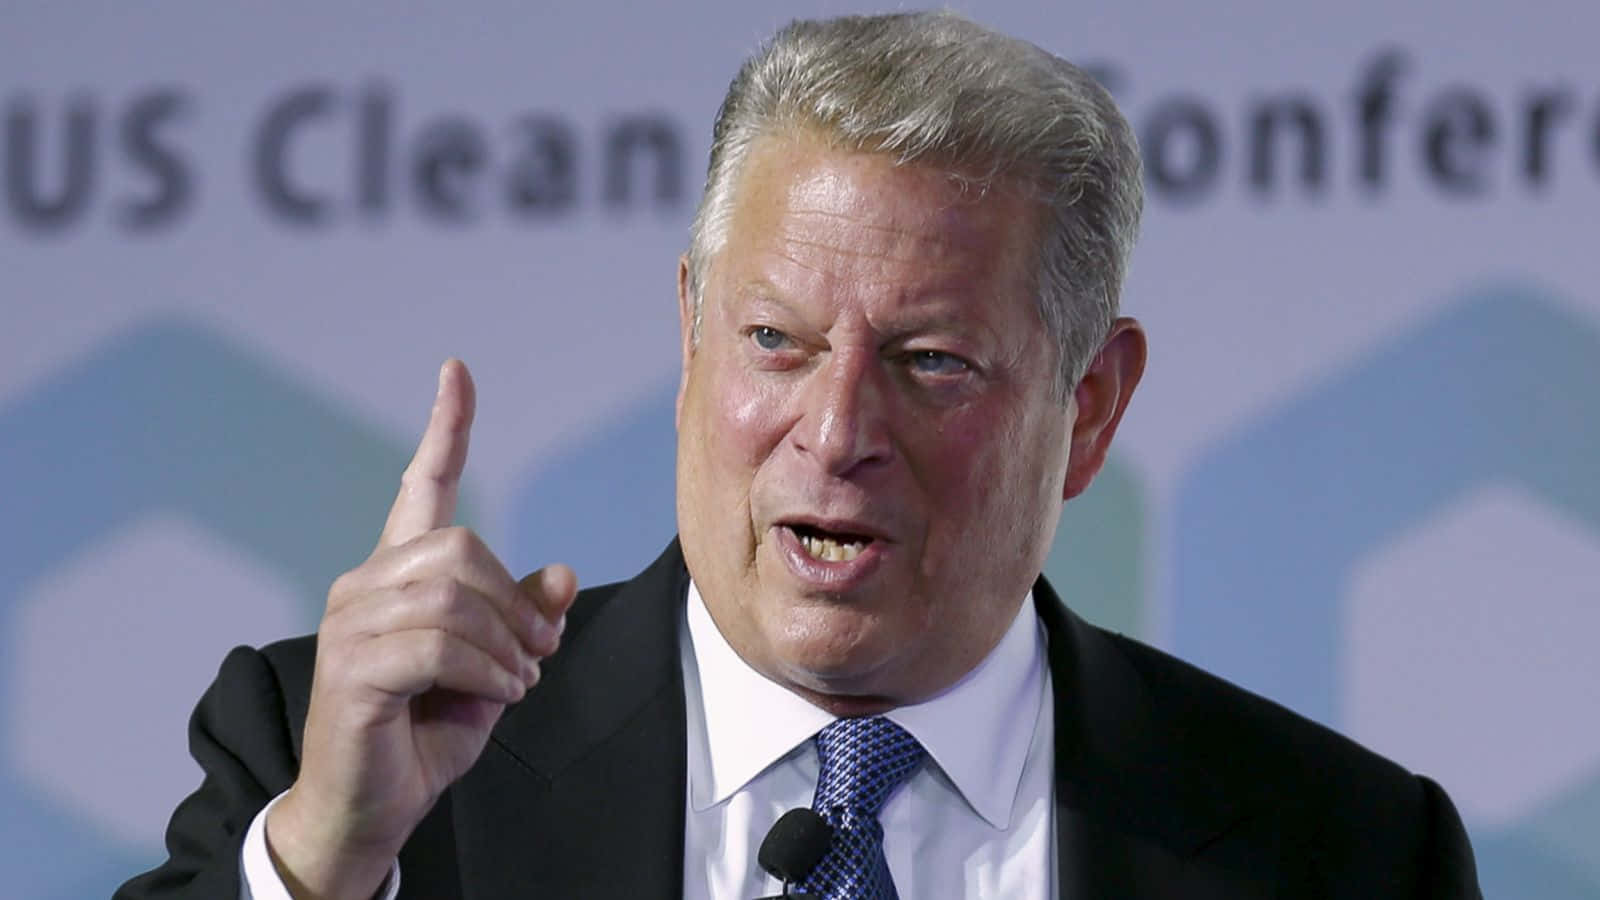 Al Gore Speaking At A Conference Wallpaper